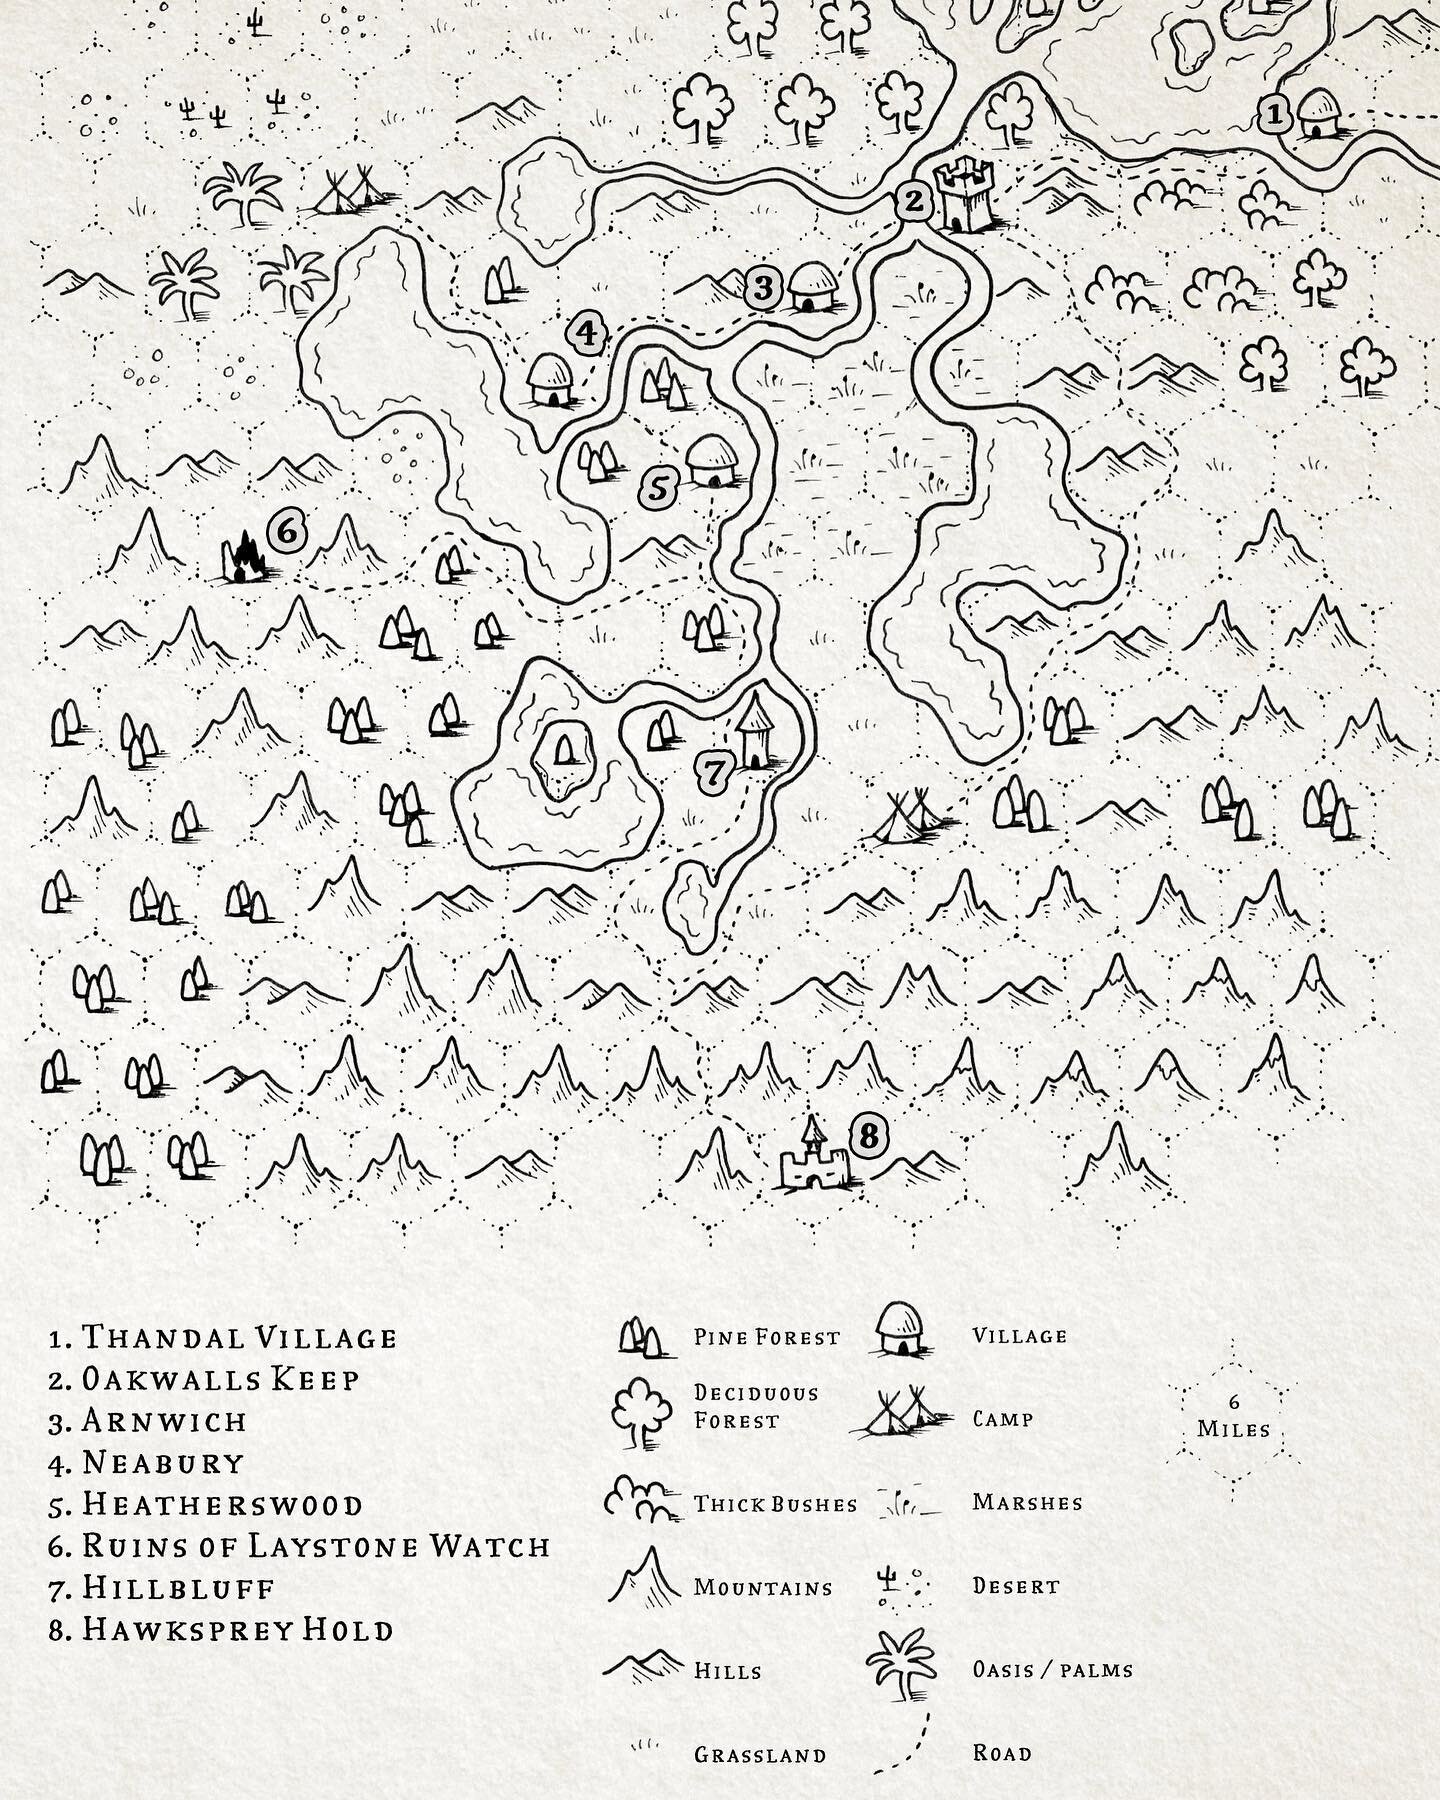 Cheeky little hex map, it&rsquo;s on Patreon if you want to grab a copy. There&rsquo;s a customisable version too.

#rpgmap #hexmap #hex #rpg #dnd #dndmap #tabletop #fantasy #fantasymap #handdrawn #mapmaking #mapdrawing #worldbuilding #modulemap